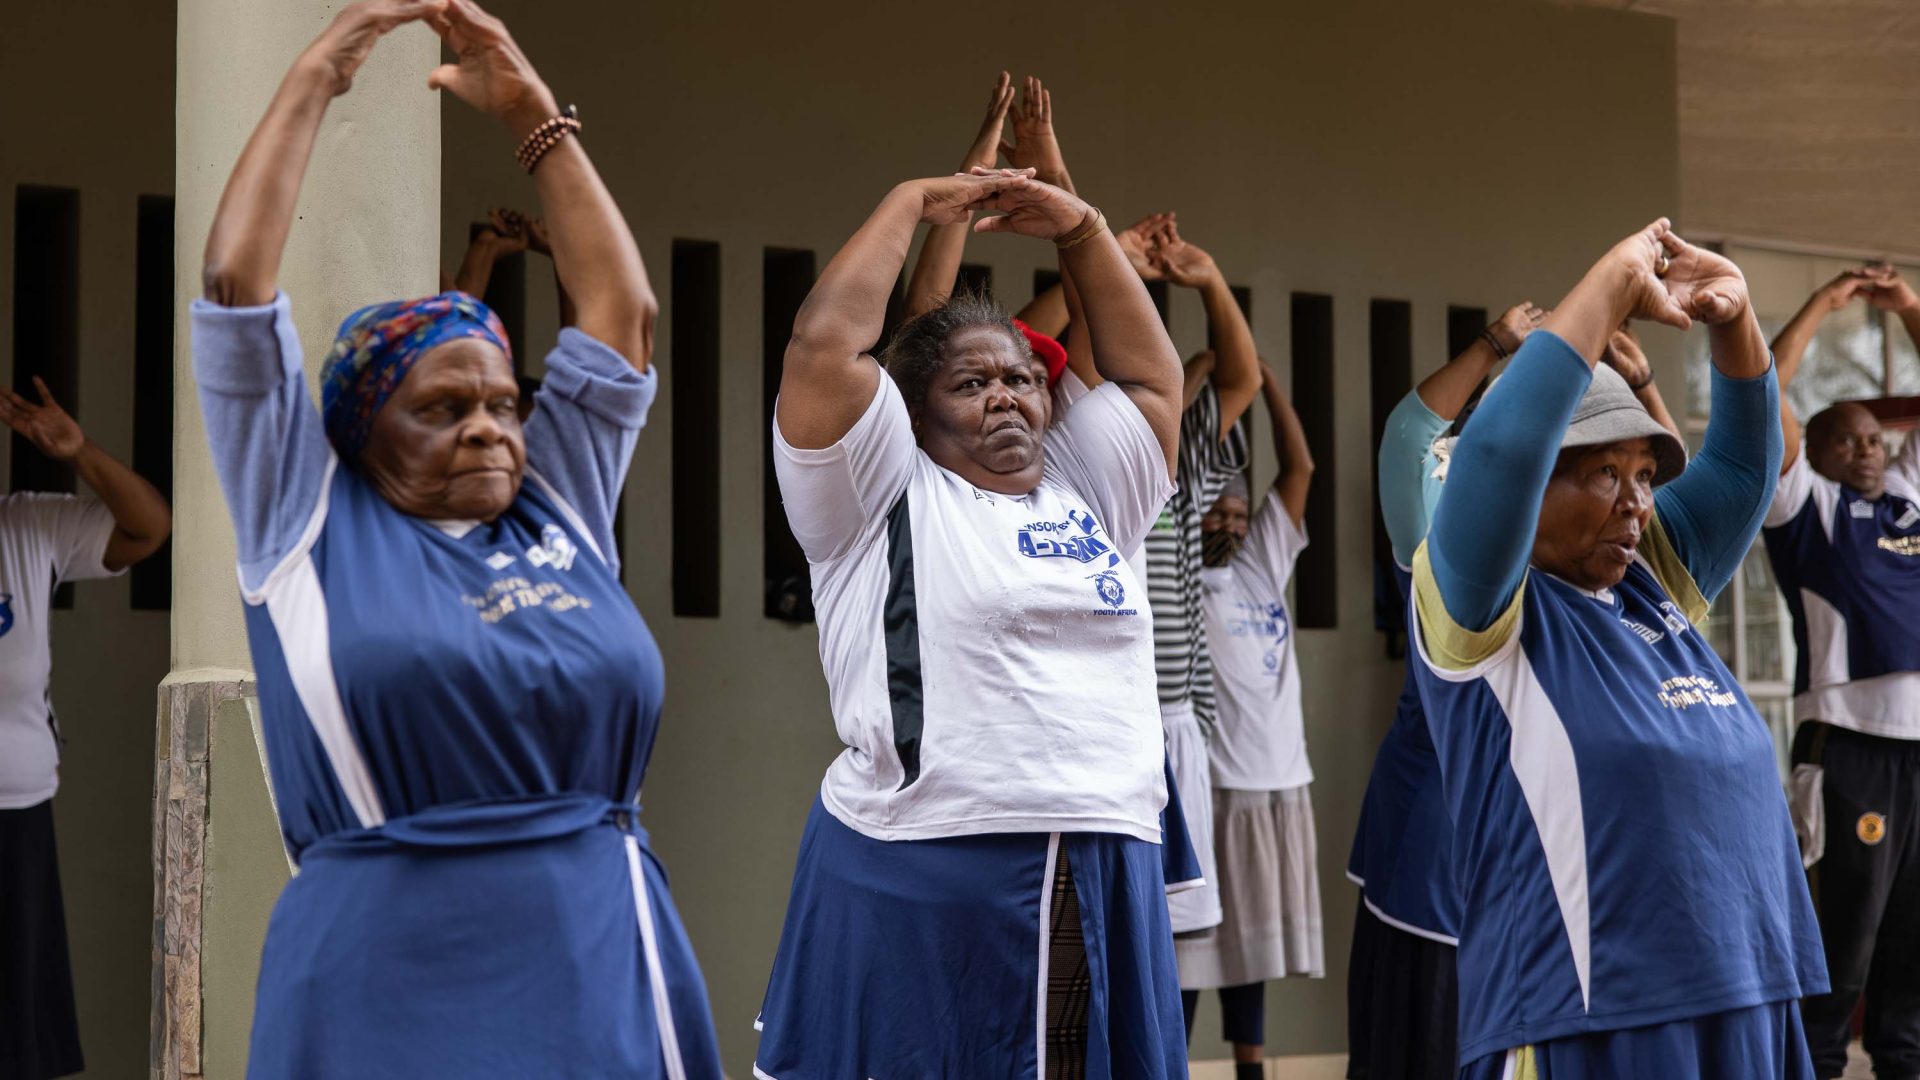 Boxing grannies workout with their arms in the air.